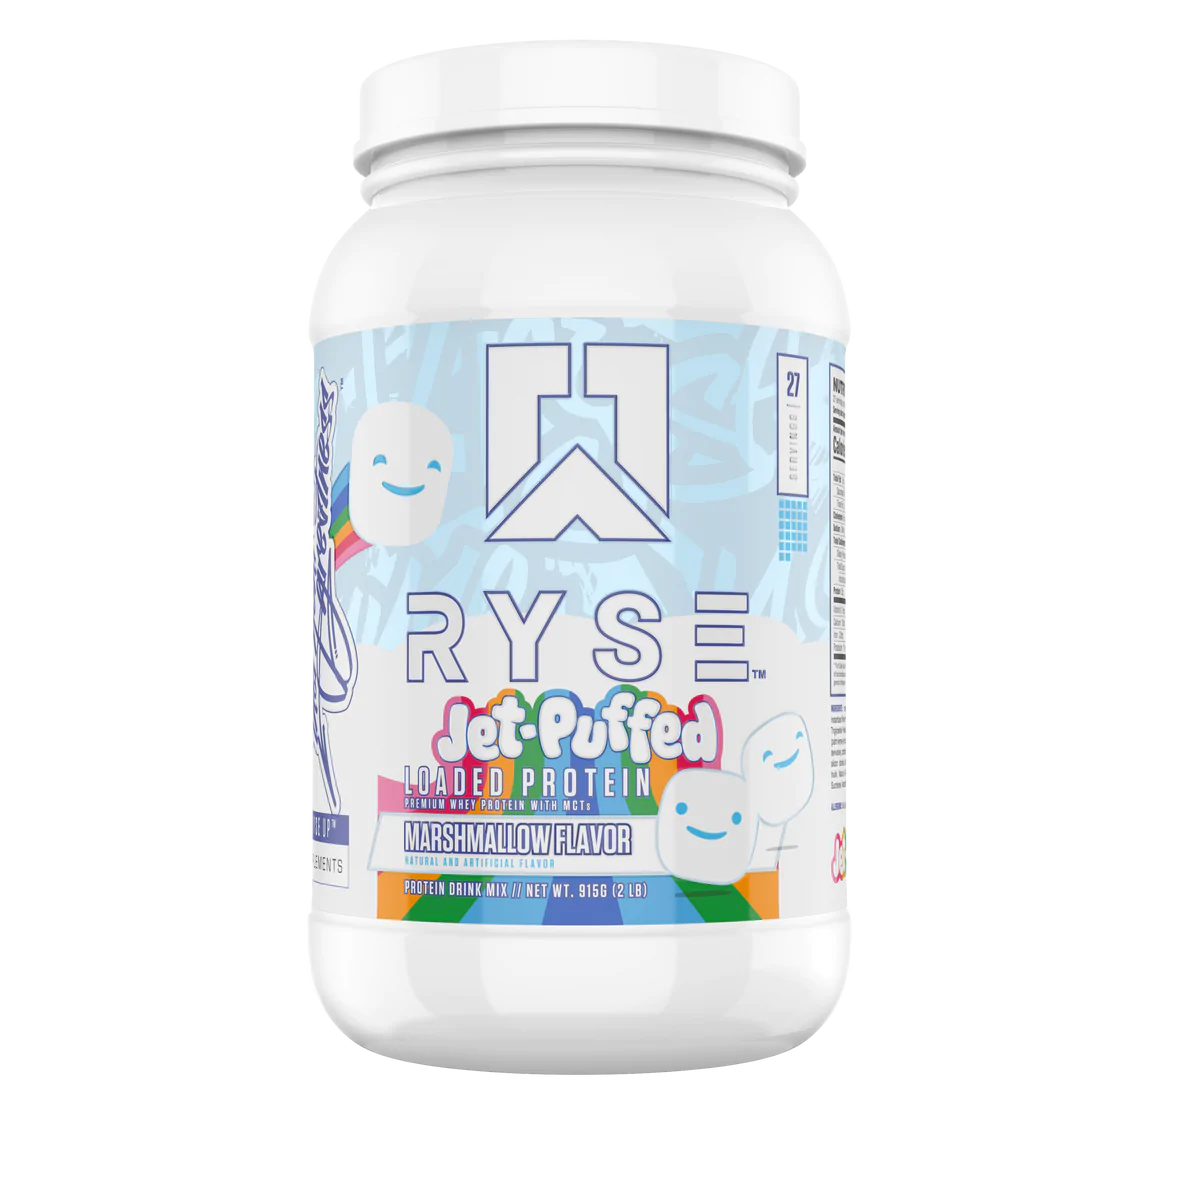 RYSE - Loaded Protein